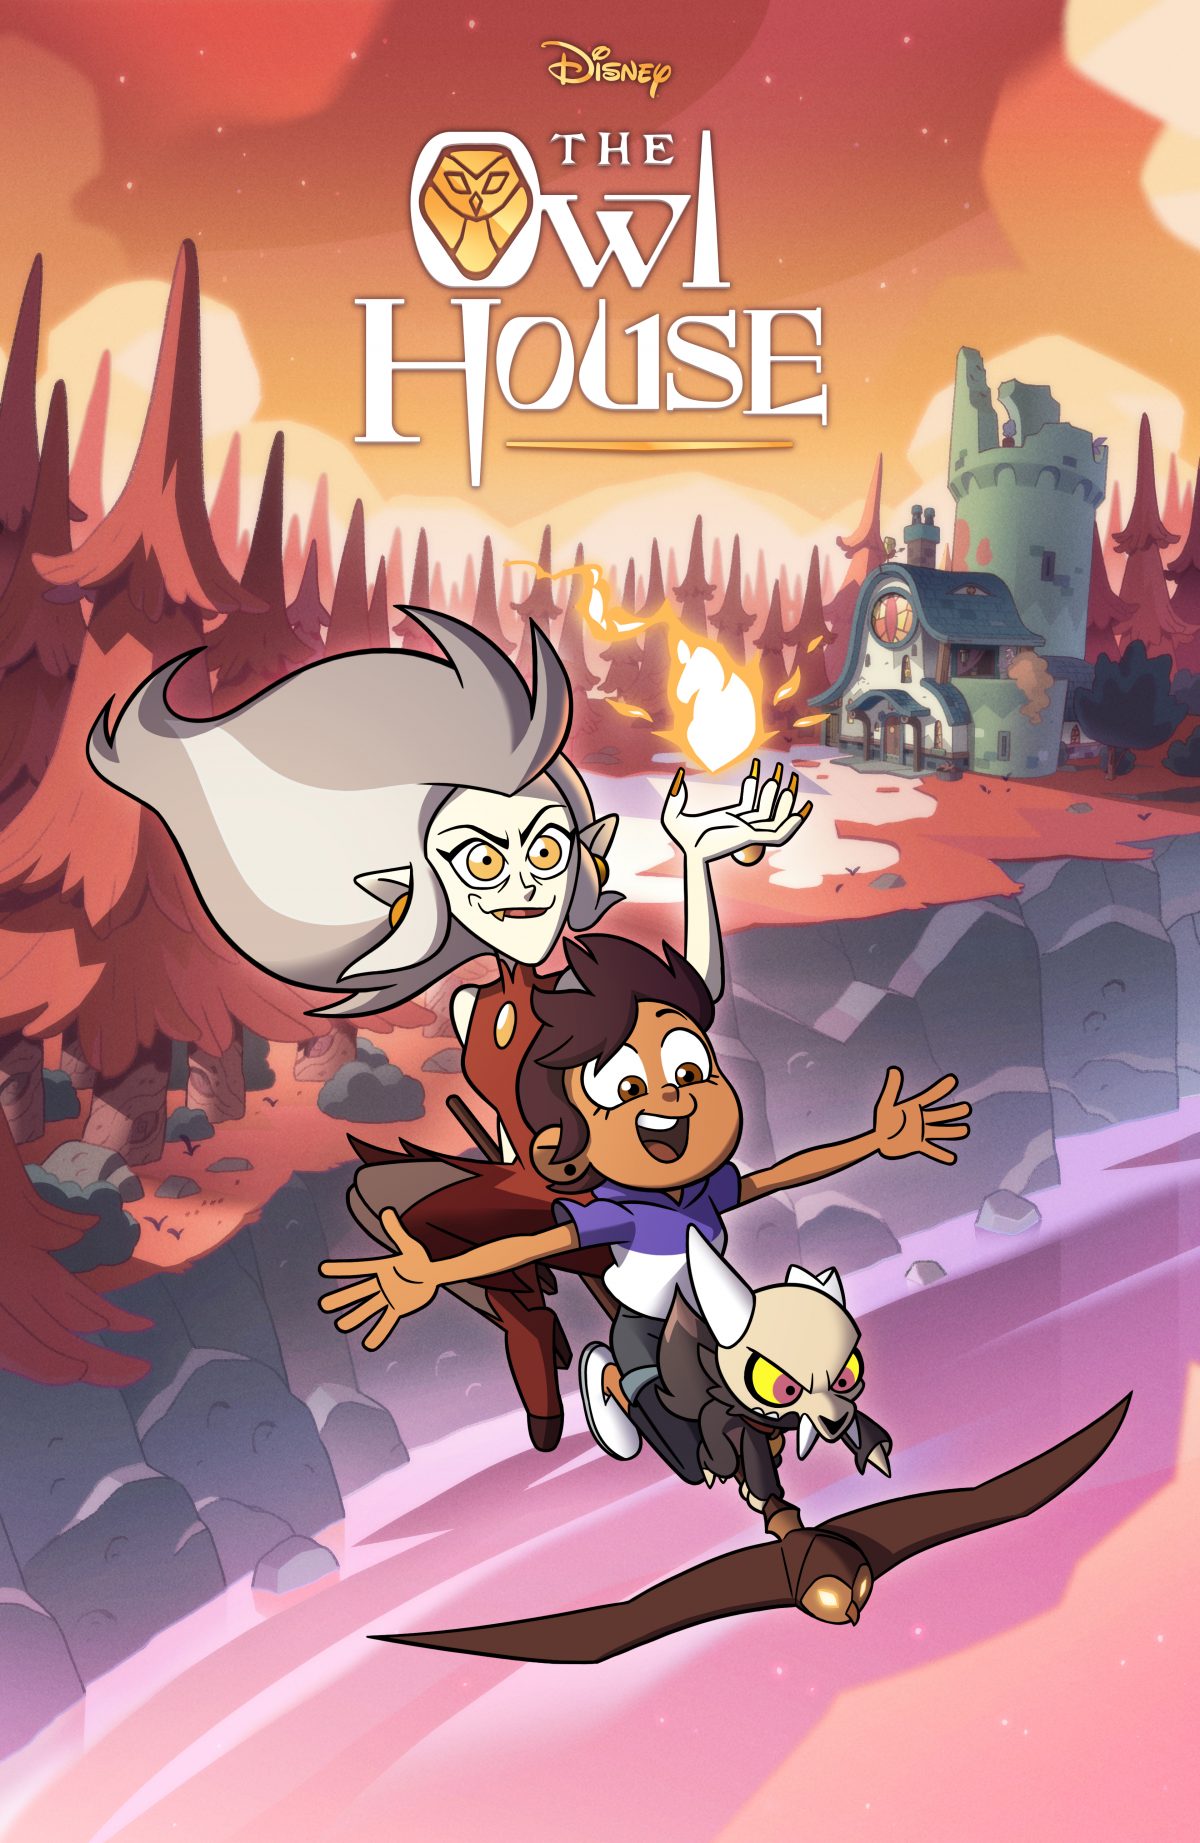 Disney Channel's Animated Series 'The Owl House' Cast Announced